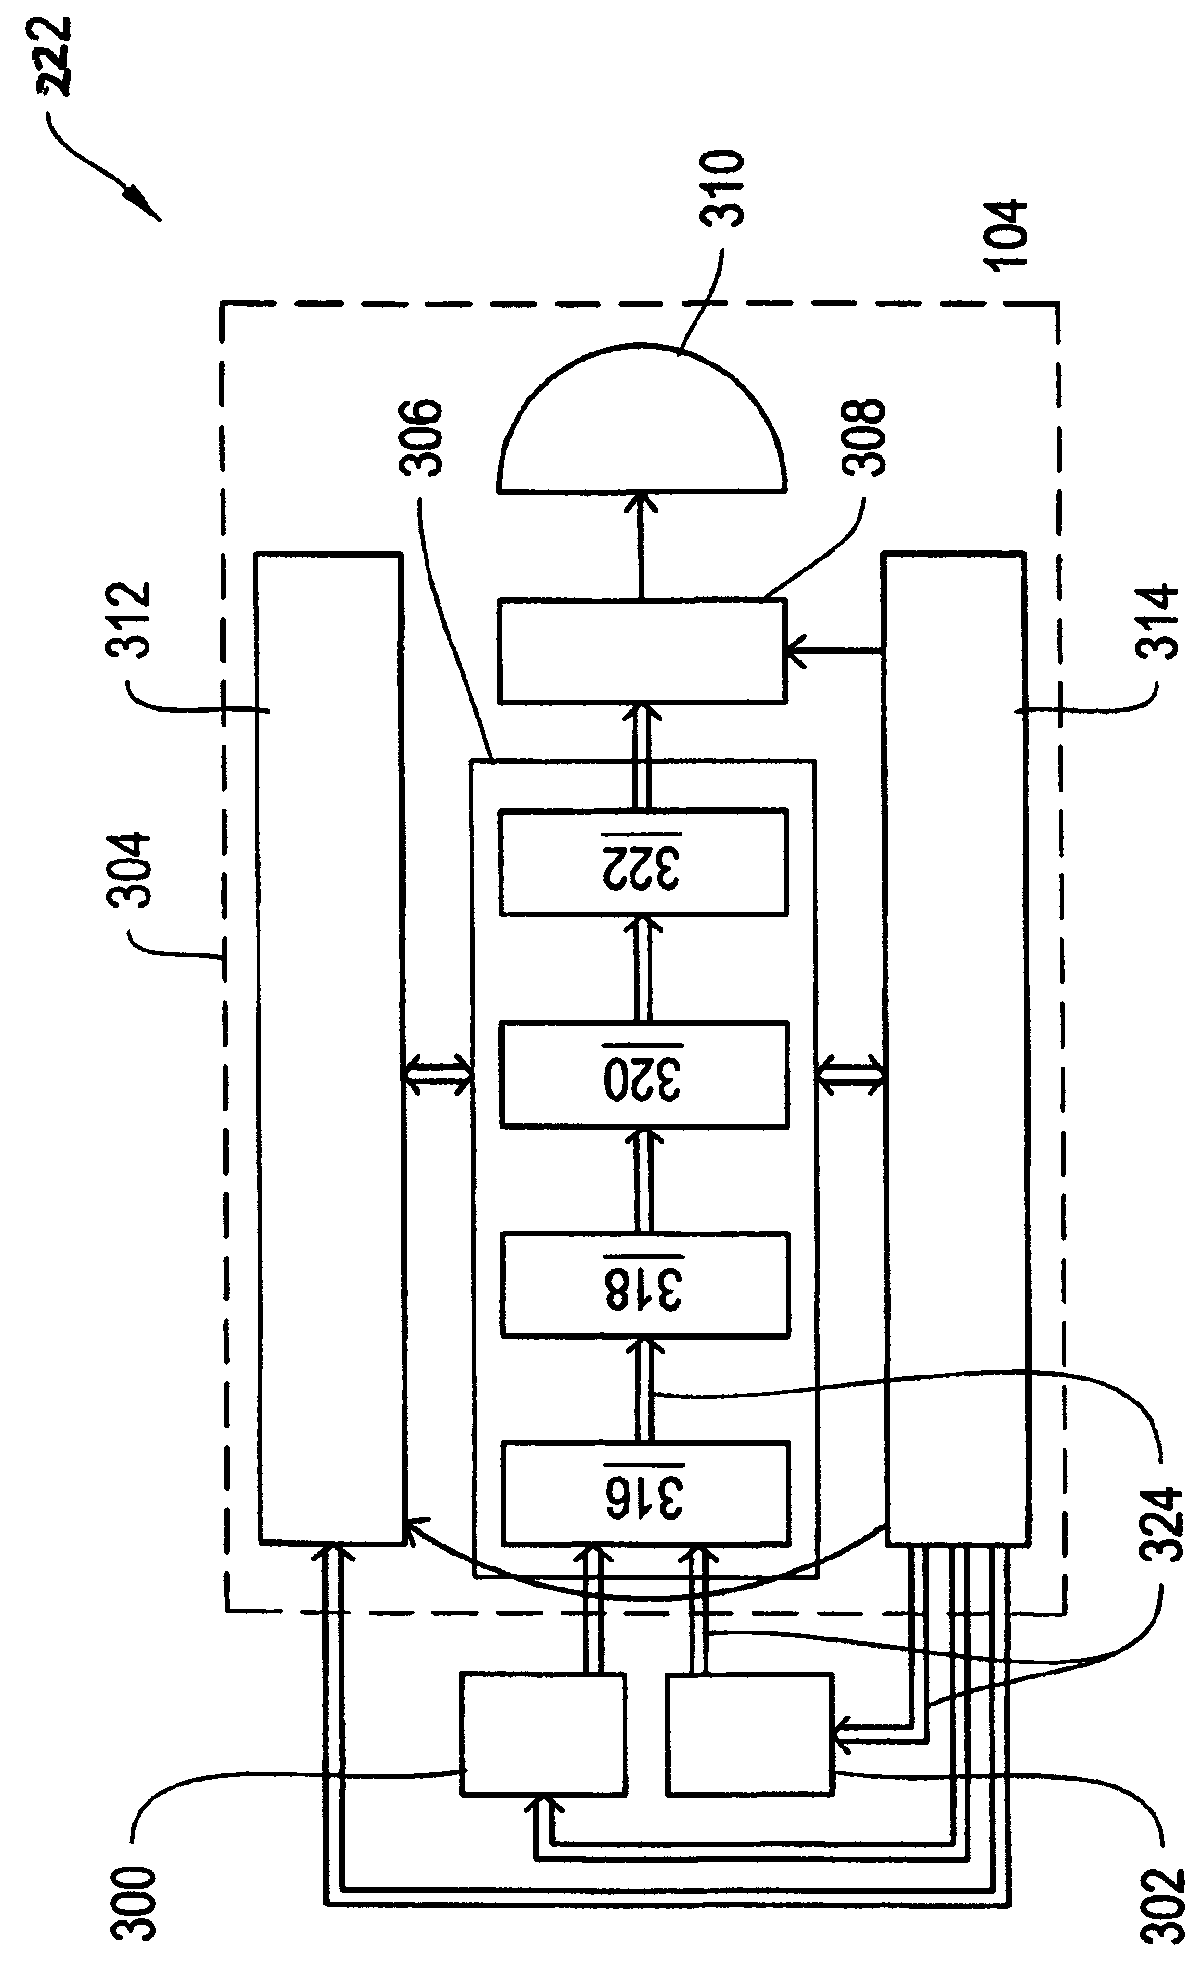 Optical communication systems and methods